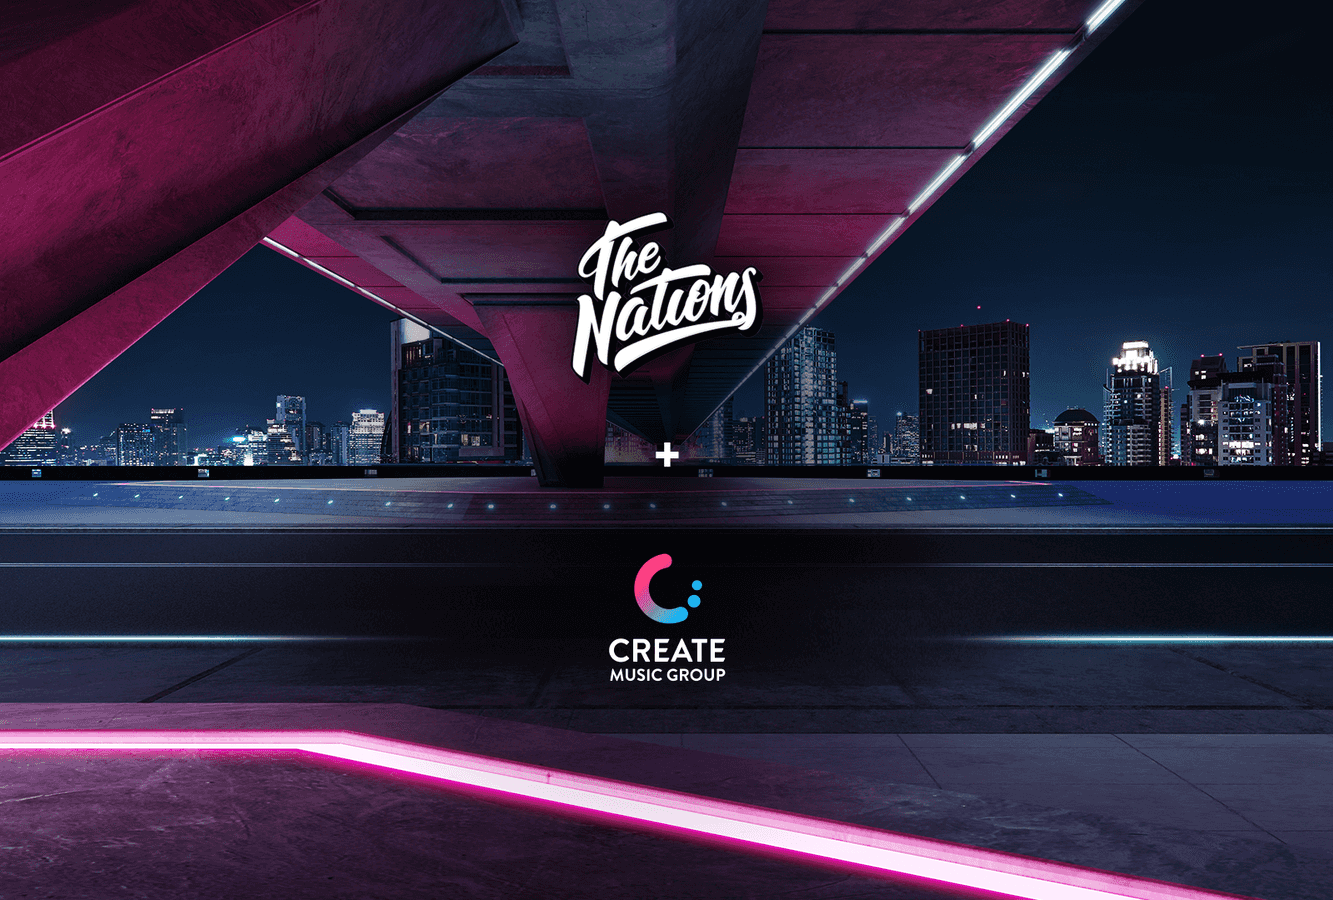 Create Music Group buys majority interest in The Nations, launches Web3 JV